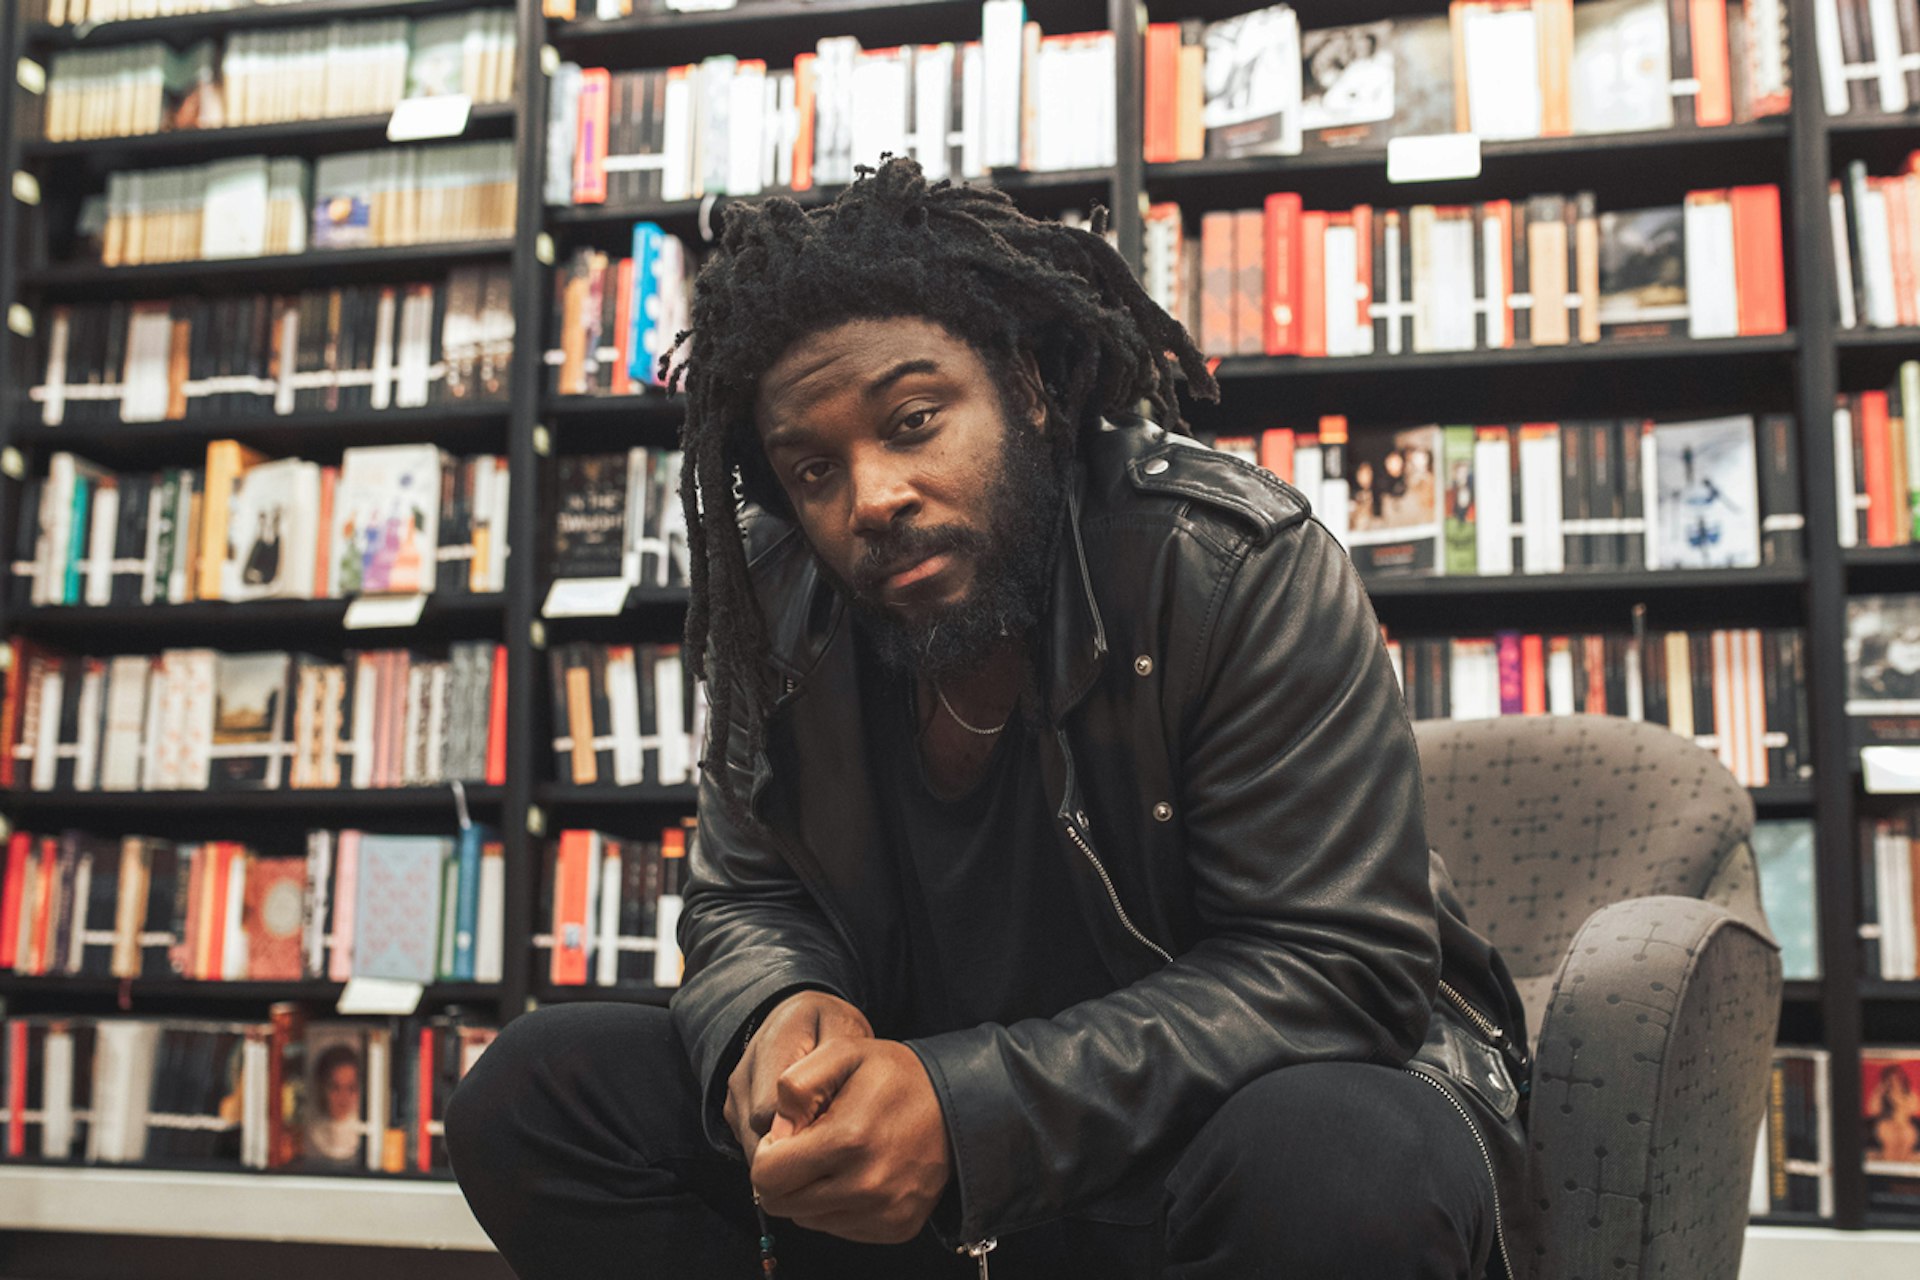 Jason Reynolds is the star that literature needs right now